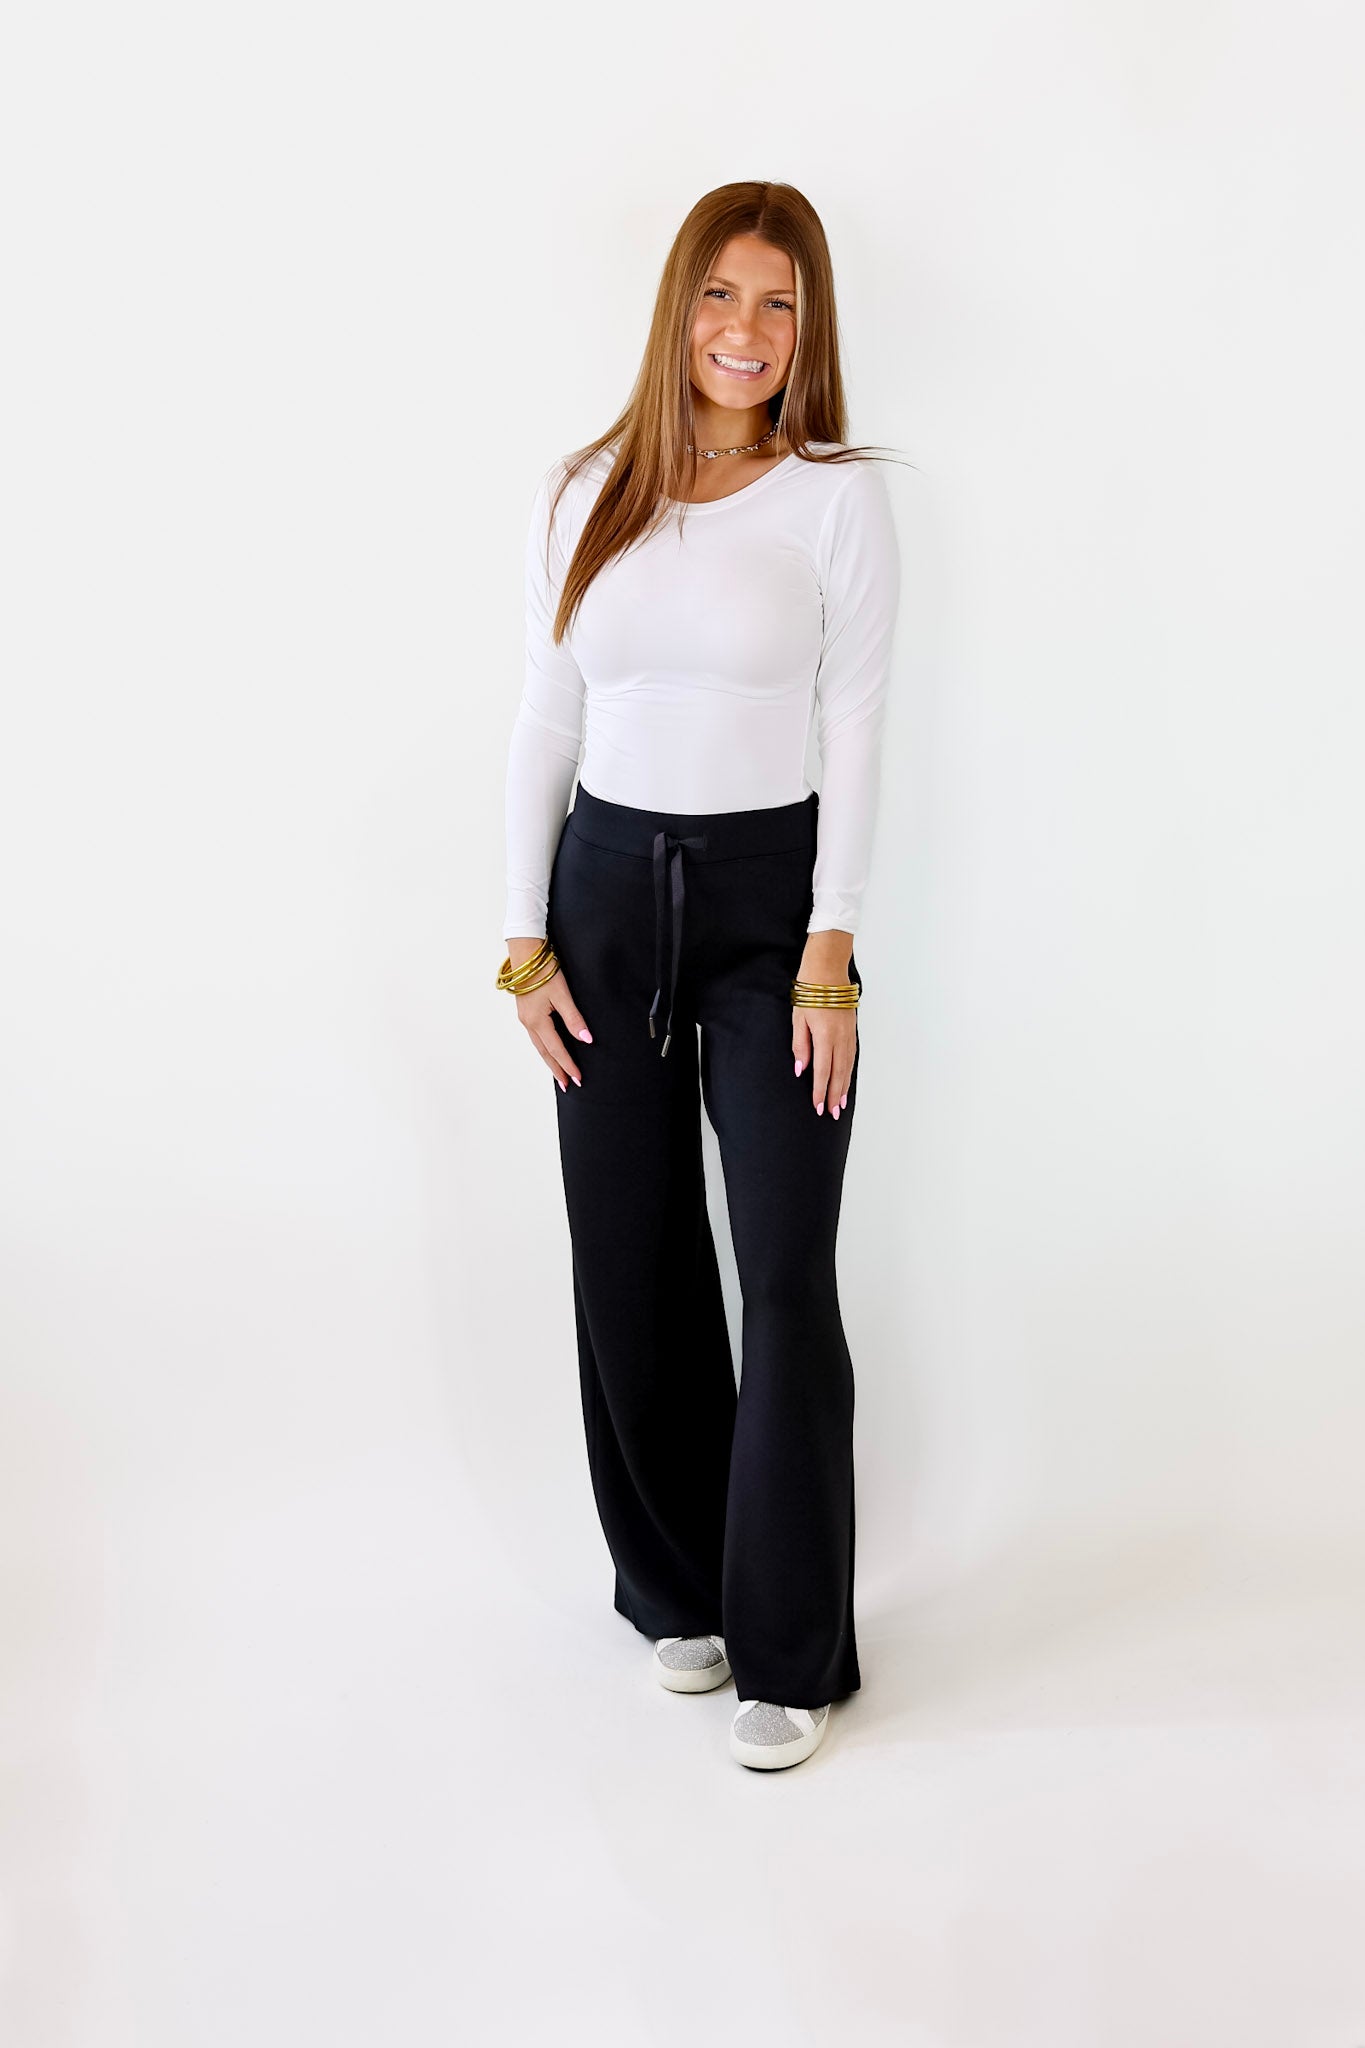 Spanx AirEssential Tapered Sweatpants